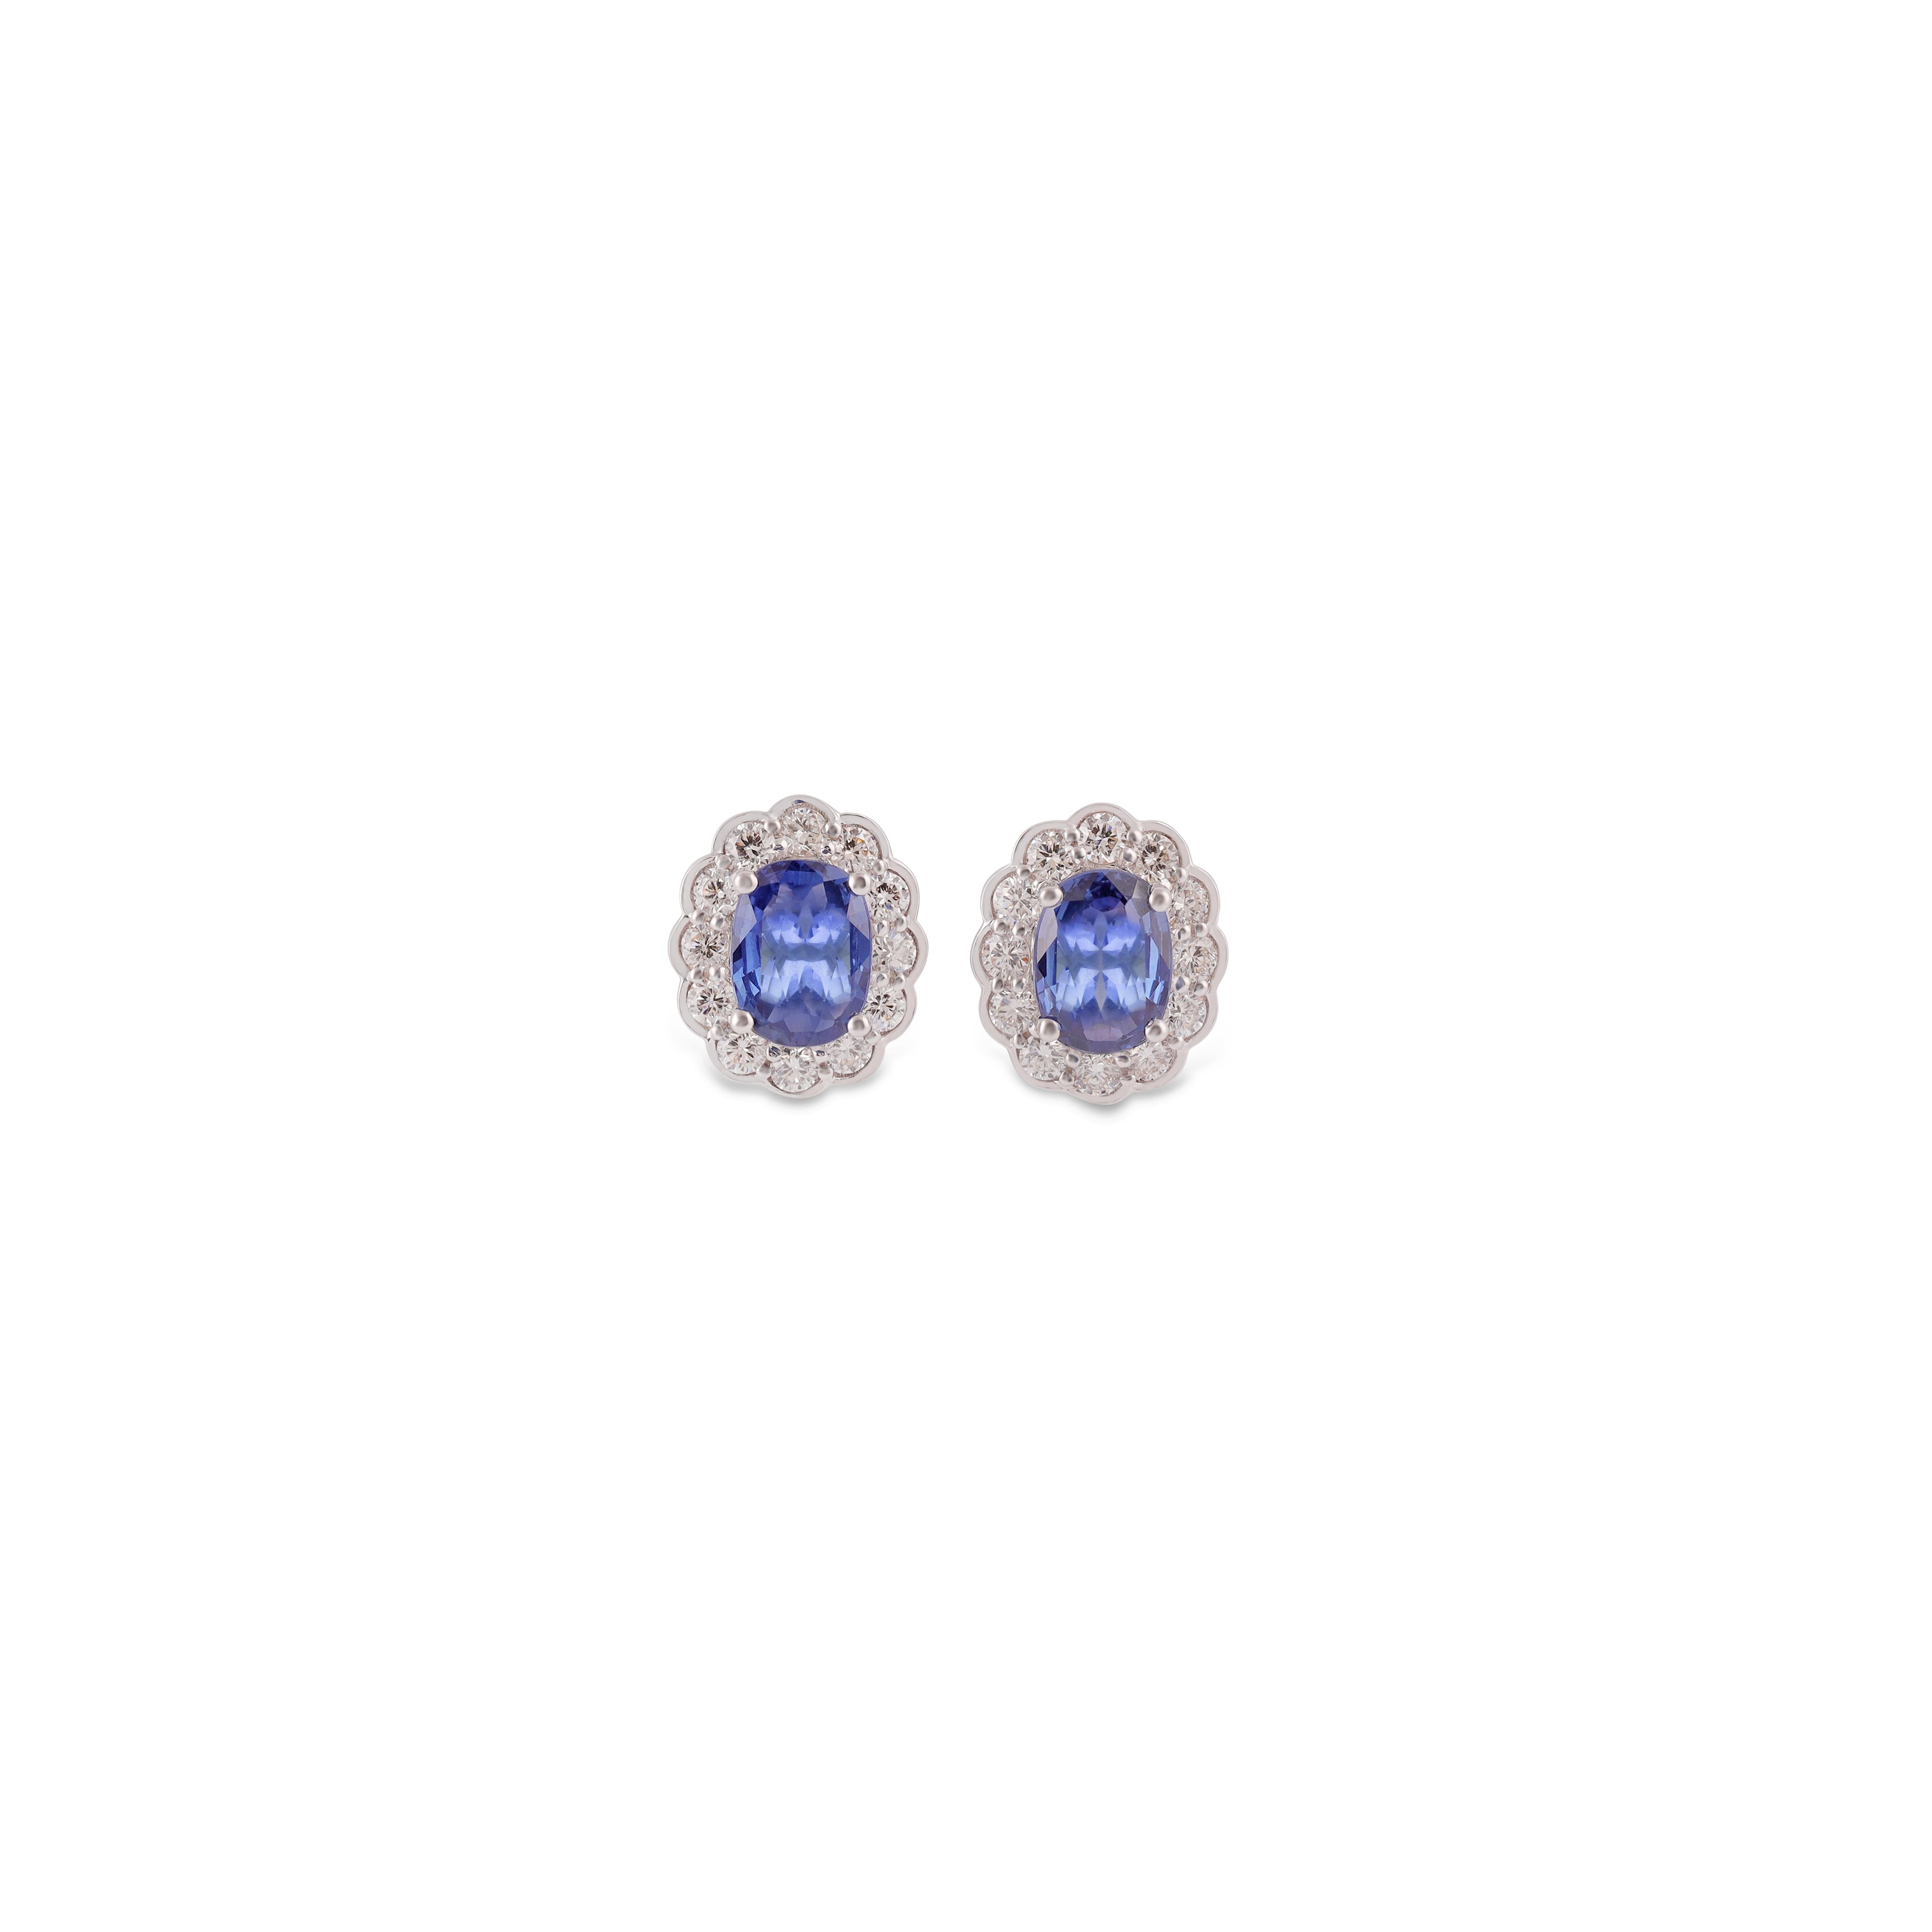 A stunning, fine and impressive pair of  1.71 carat blue sapphire & 0.57 Carat  Diamond with Solid 18k White Gold. 

Studs create a subtle beauty while showcasing the colors of the natural precious gemstones and illuminating diamonds making a